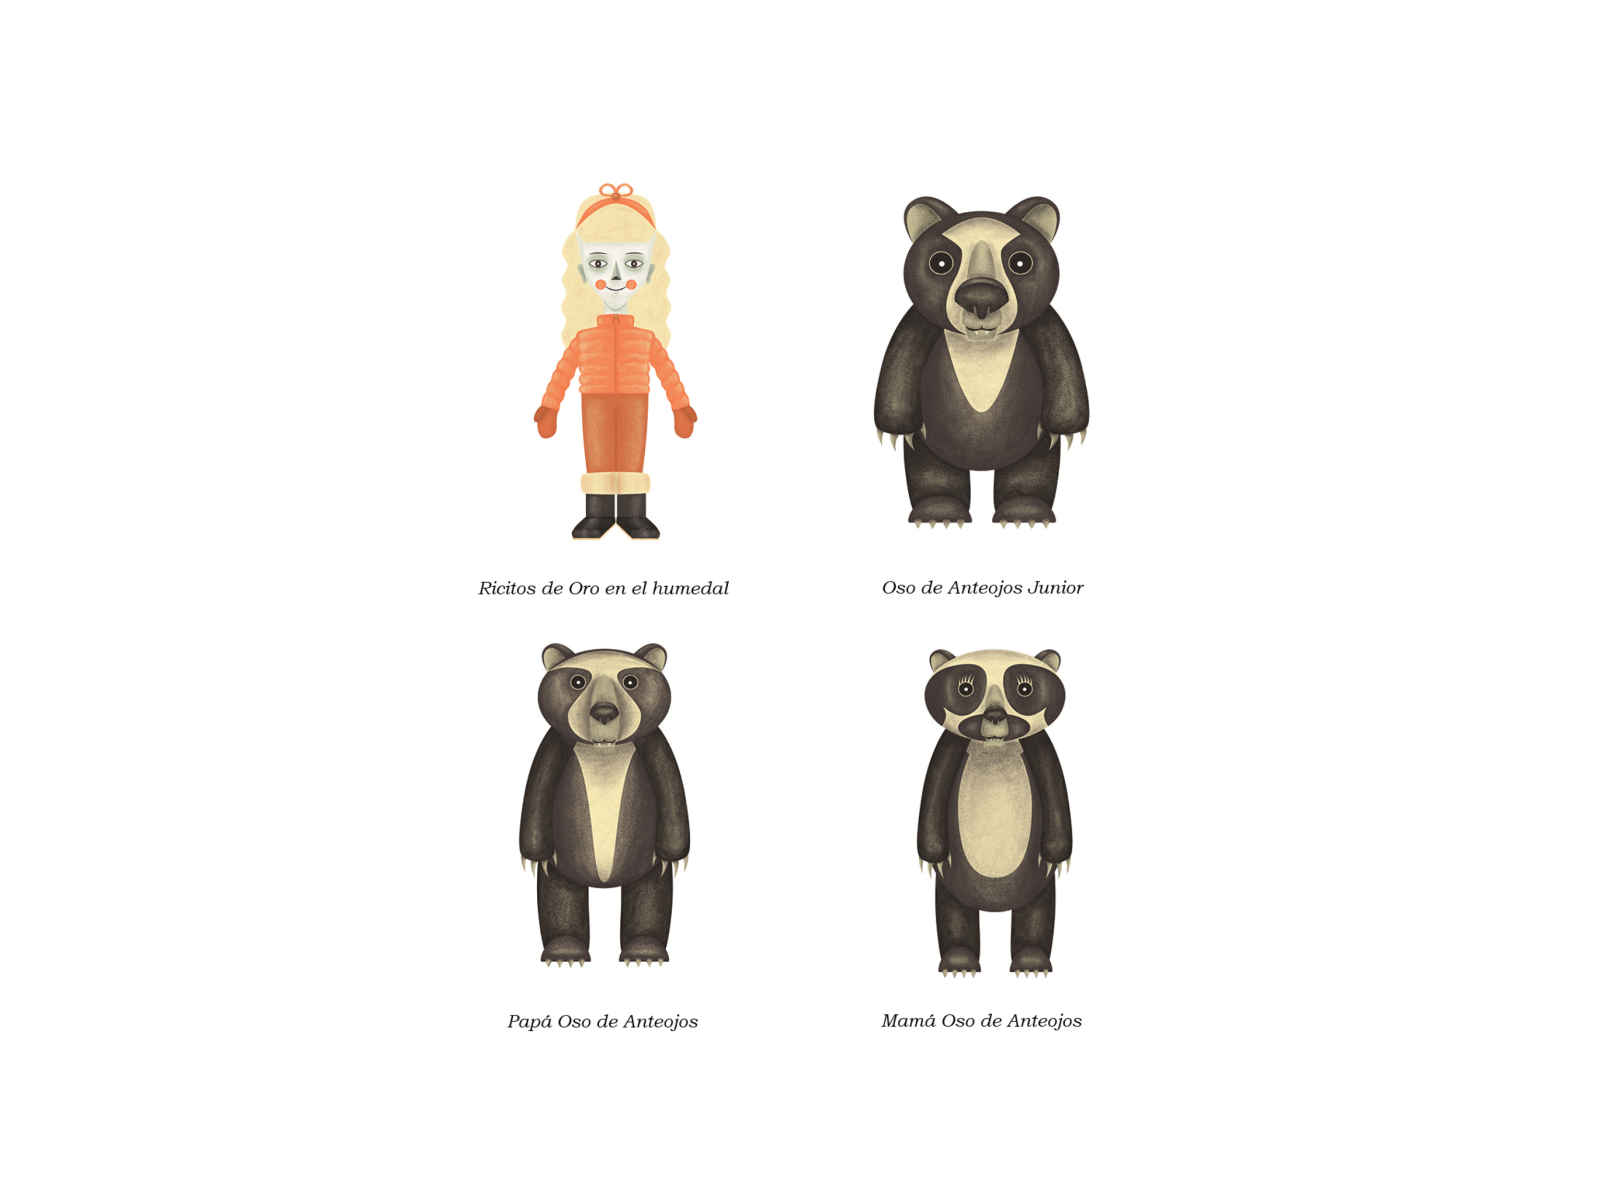 Character Design For Goldilocks And The Three Bears By Juan Pablo Mendez On Dribbble,Residential Quonset Hut Interior Design